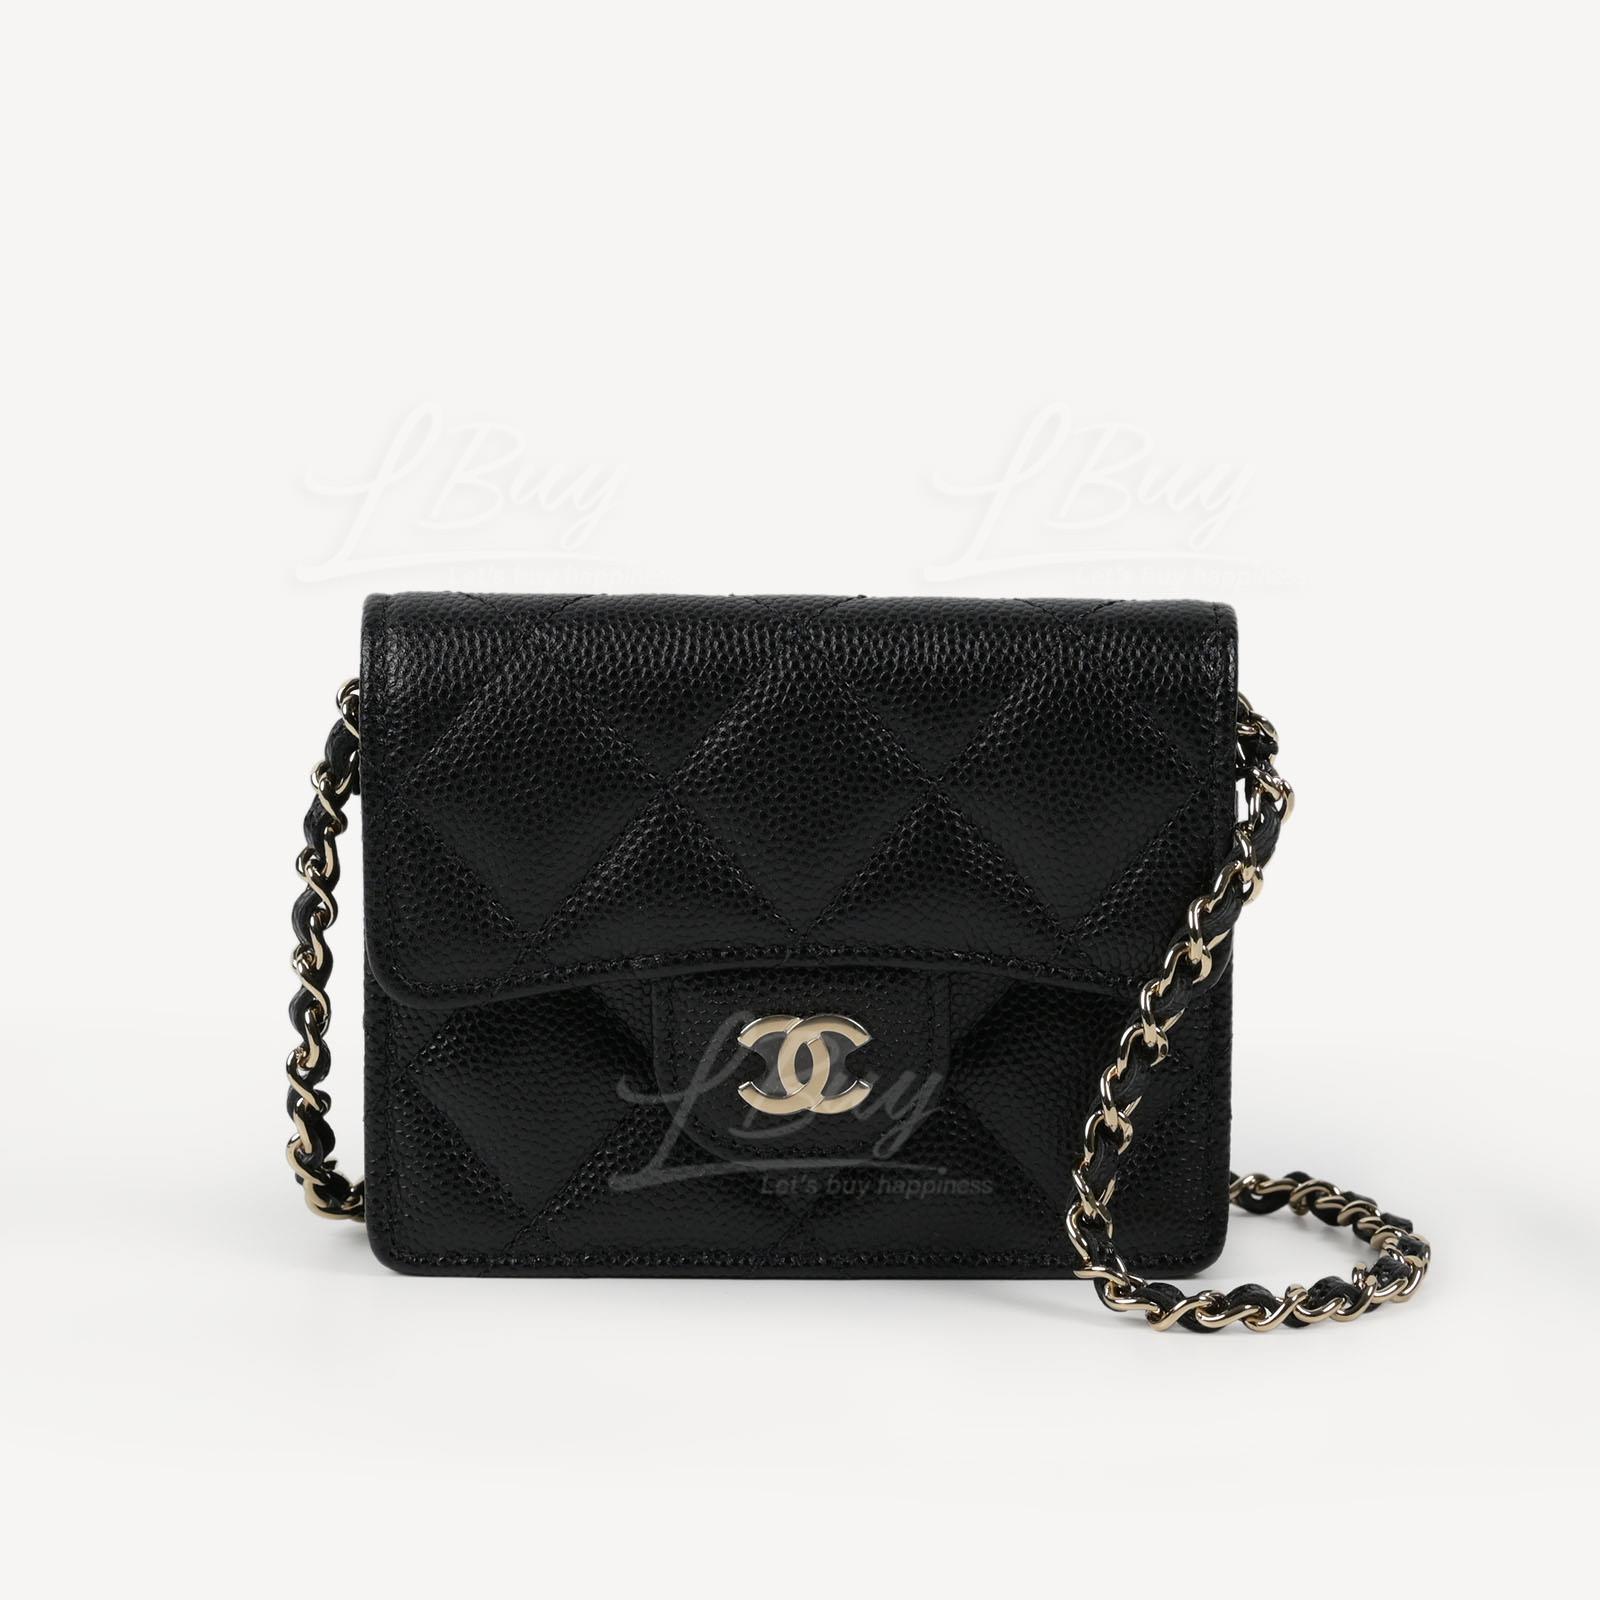 Chanel Black Caviar Leather Flap Card Holder With Chain